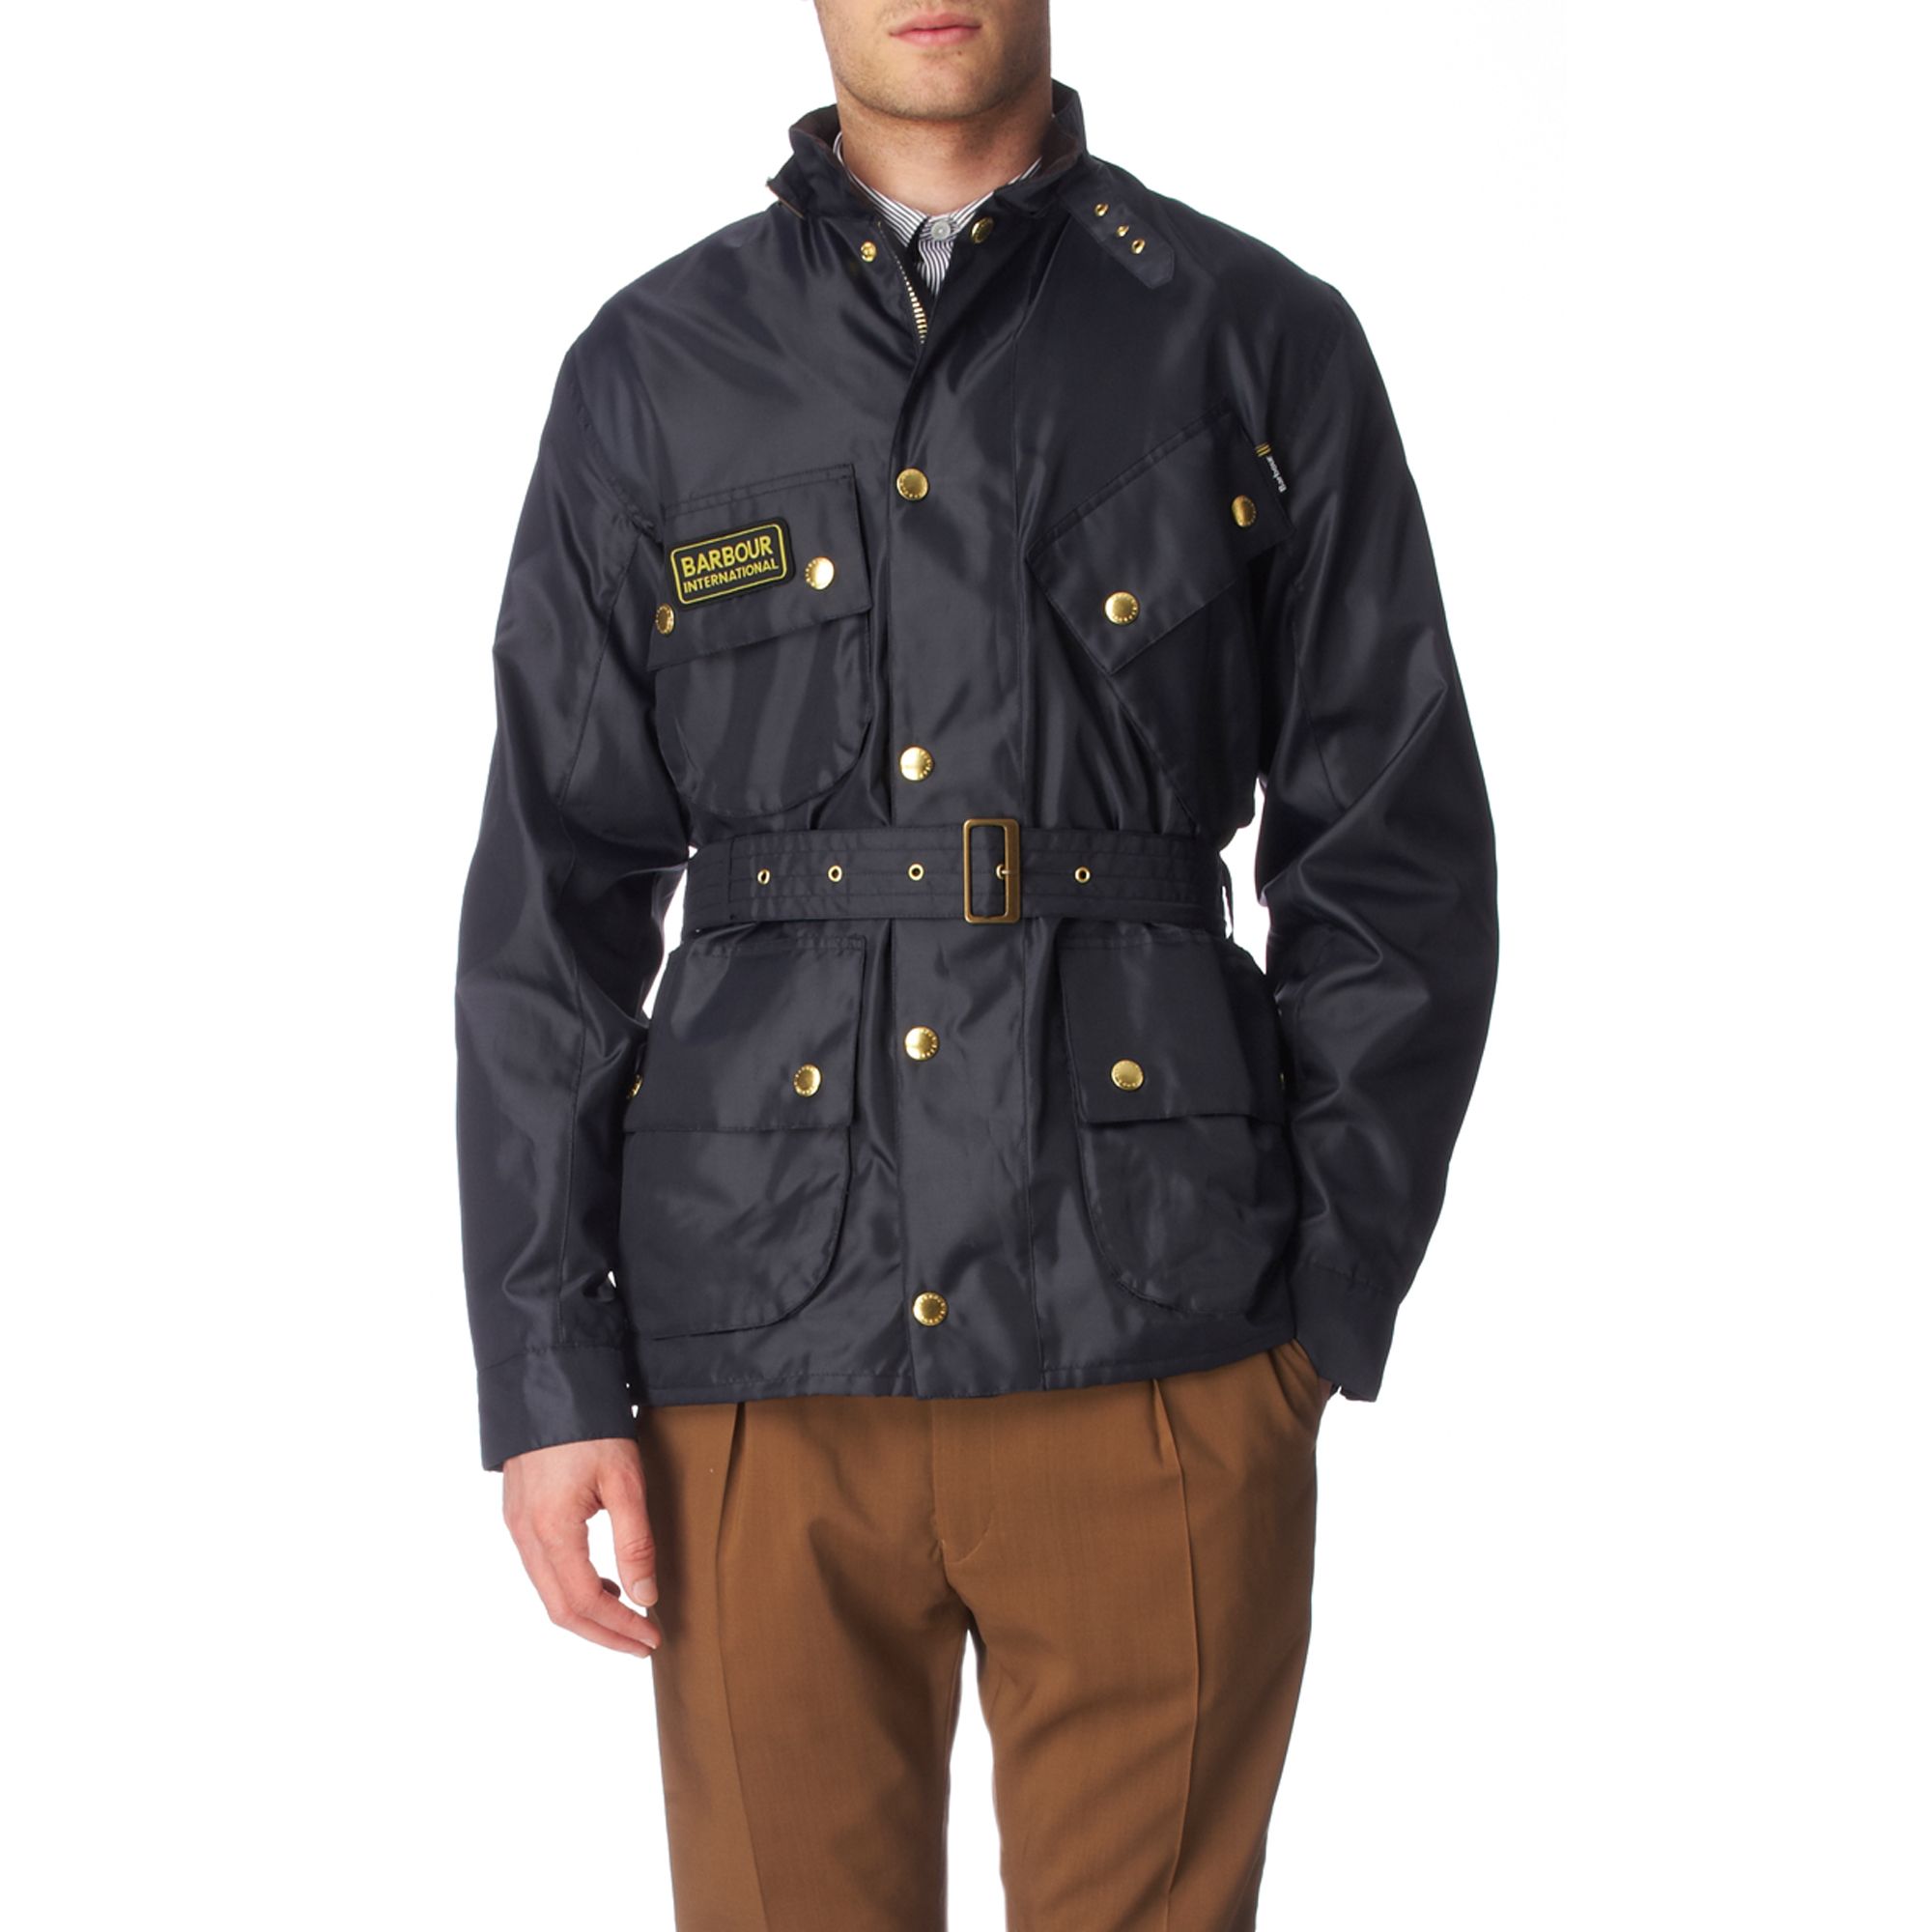 Barbour A7 Brass Jacket on Sale, SAVE 60%.